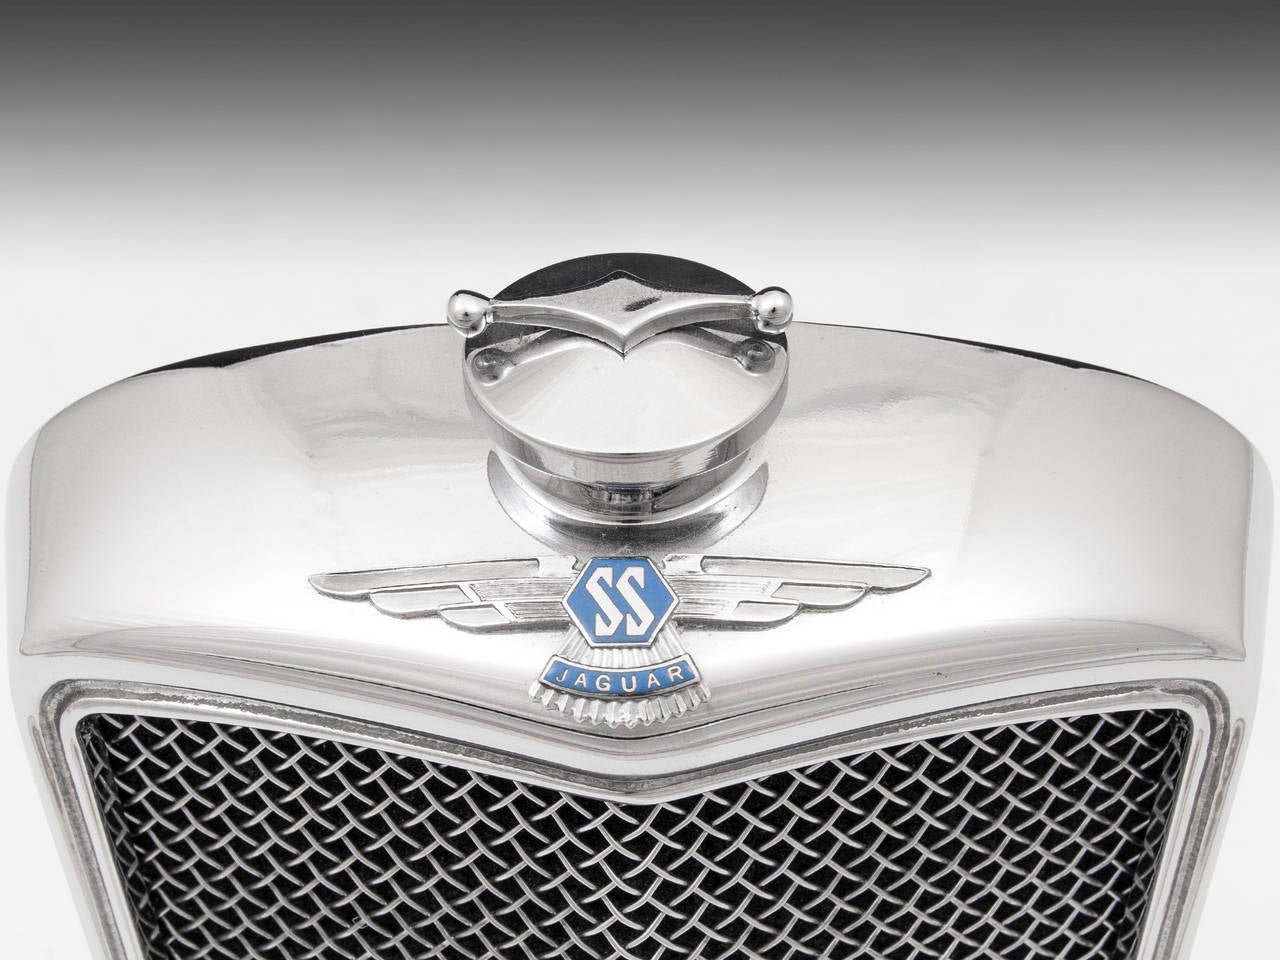 20th Century Jaguar Decanter Styled after a Chrome Radiator Grill and Enamelled SS Badge